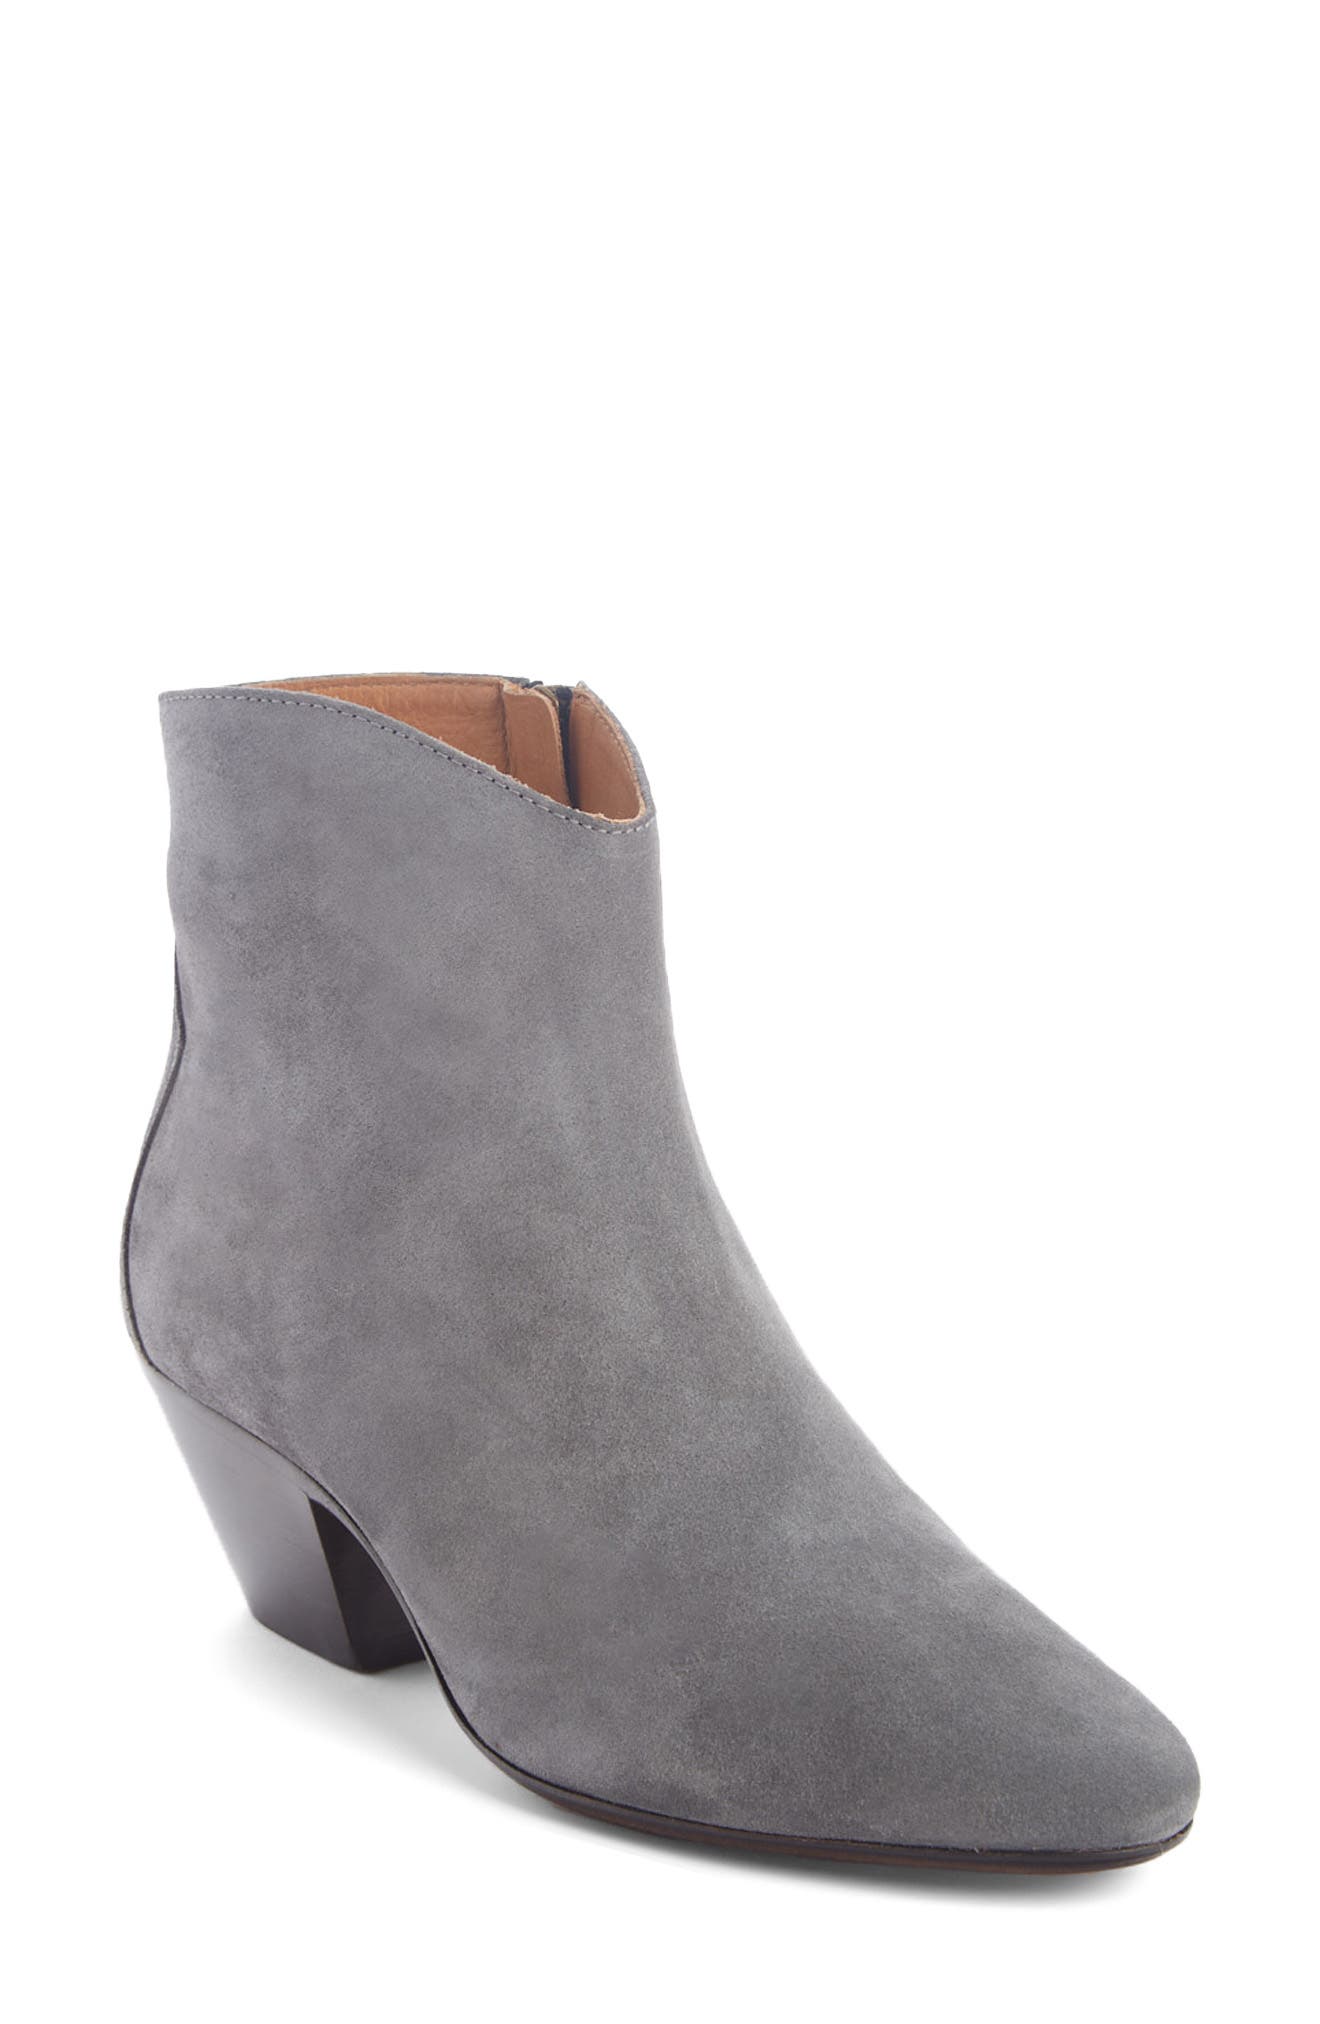 designer ankle boots womens